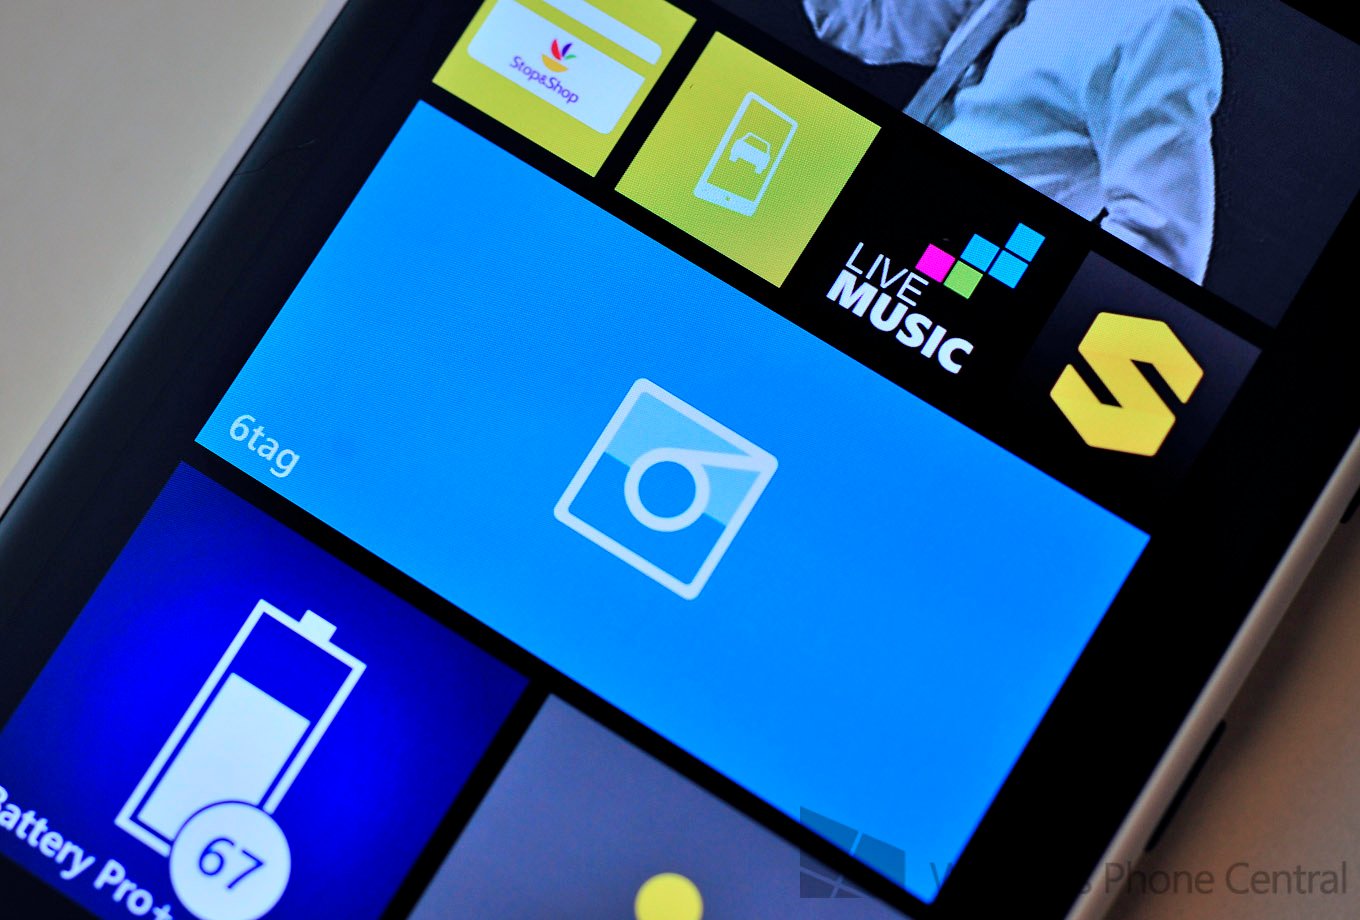 6tag for Windows Phone